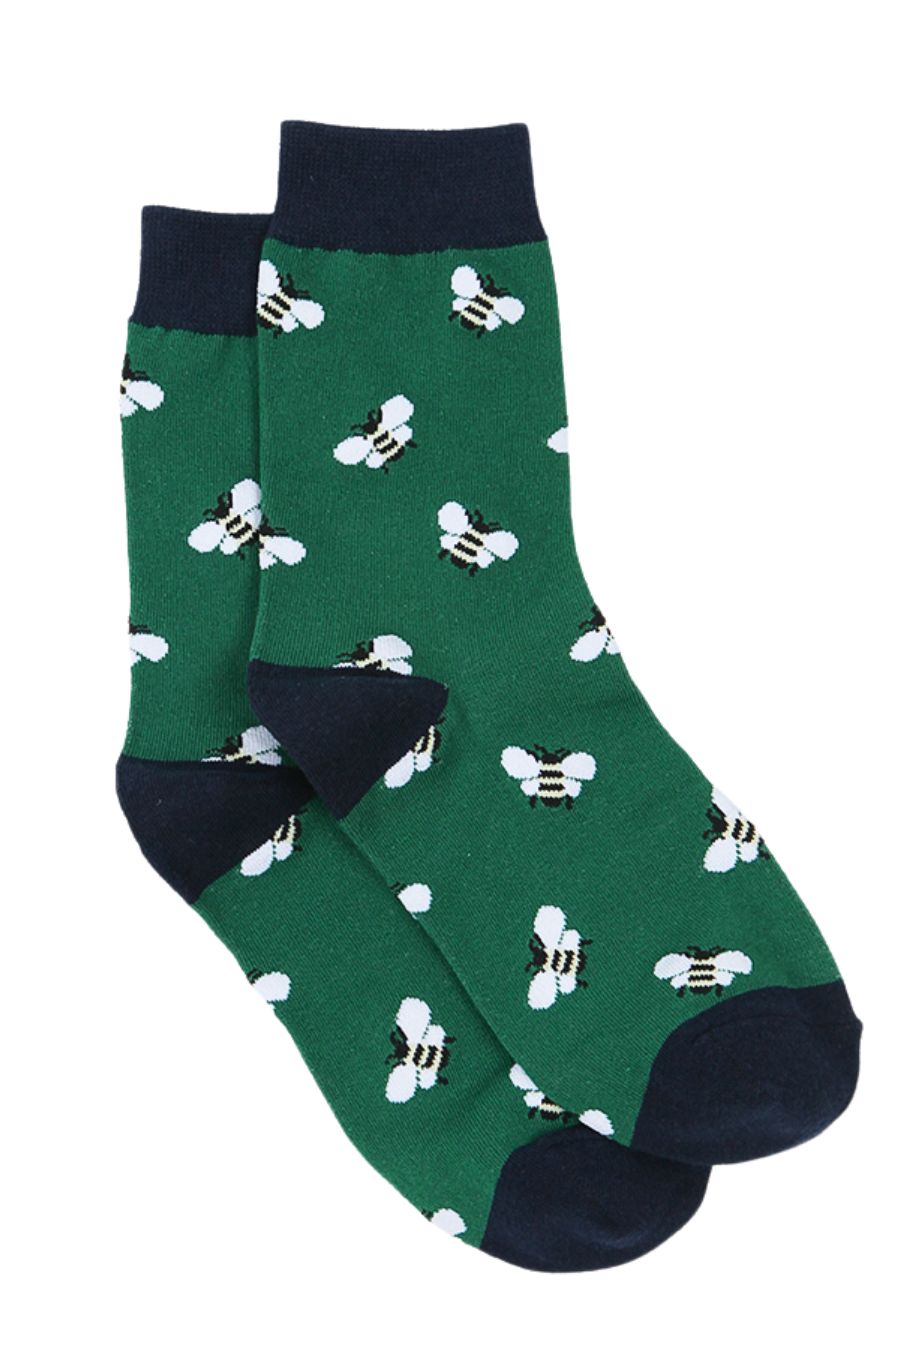 green ankle socks with an all over white bee pattern